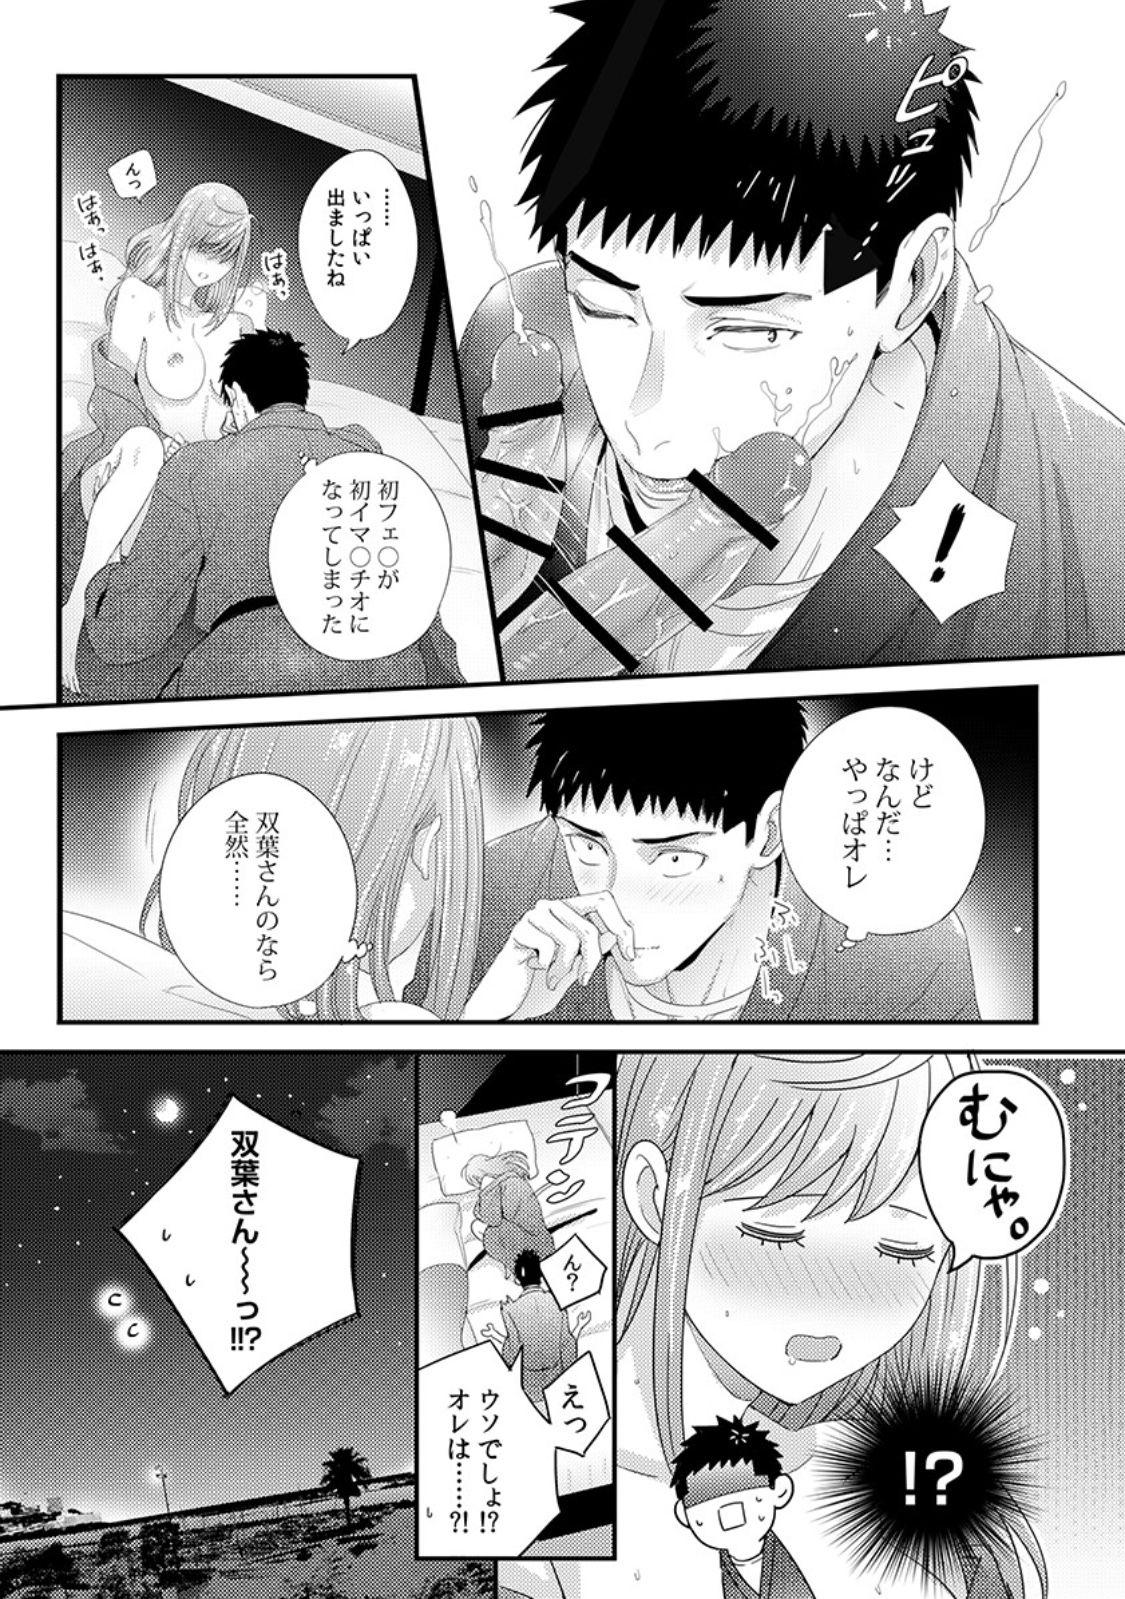 Please Let Me Hold You Futaba-San! Ch. 1+2 22